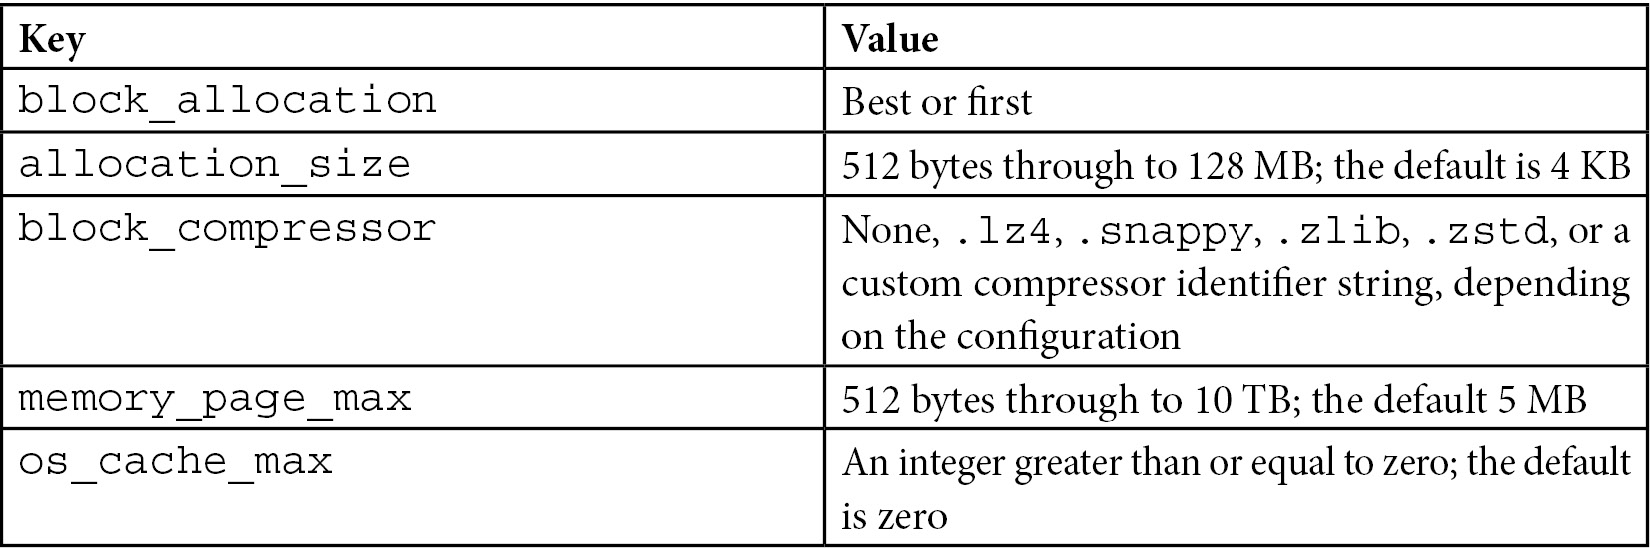 Table 10.1 – WiredTiger key-value pairs
